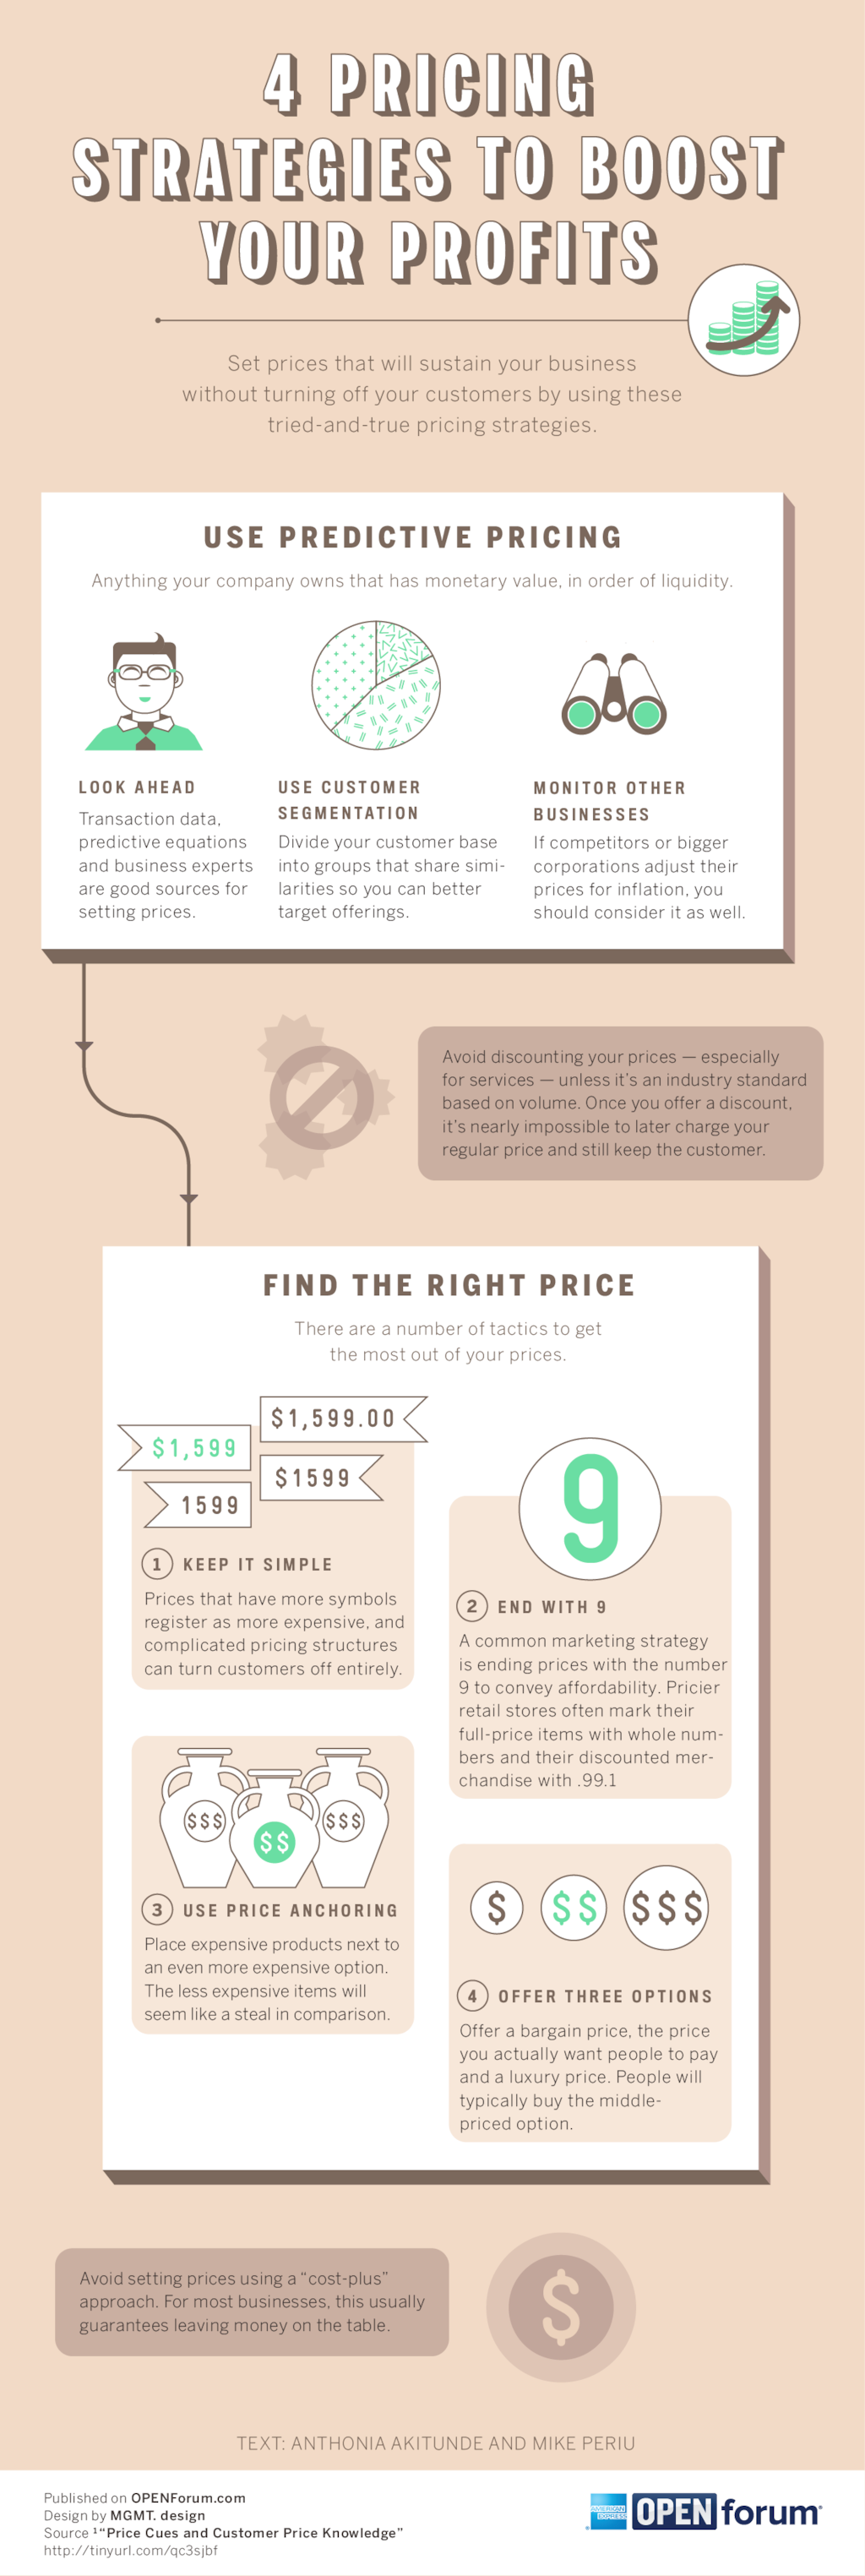 4 Pricing Strategies to Boost Your Profits